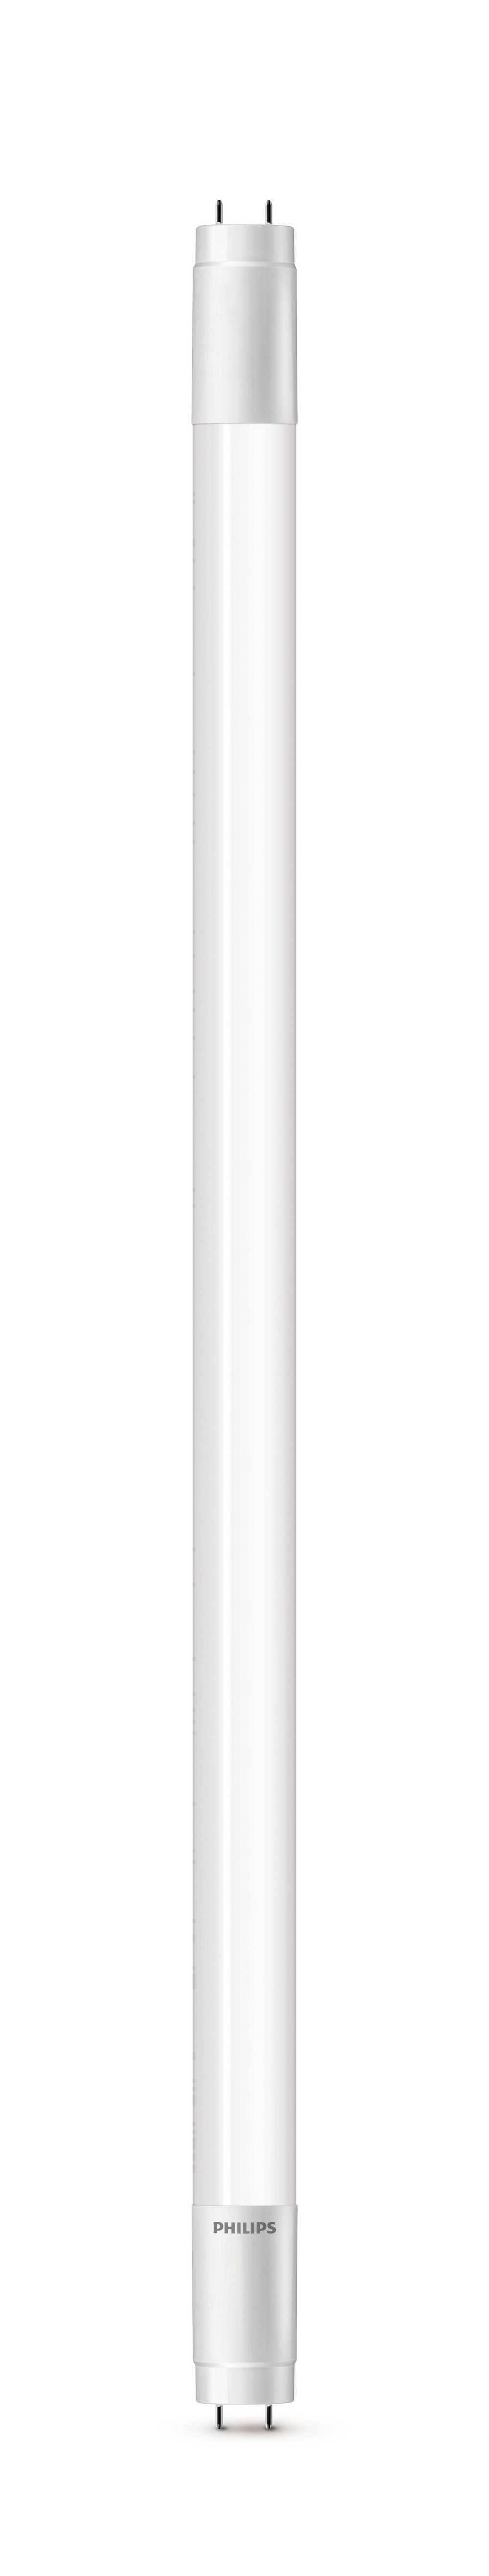 Philips LED T8 600mm 10W G13 CW ND 1CT/4